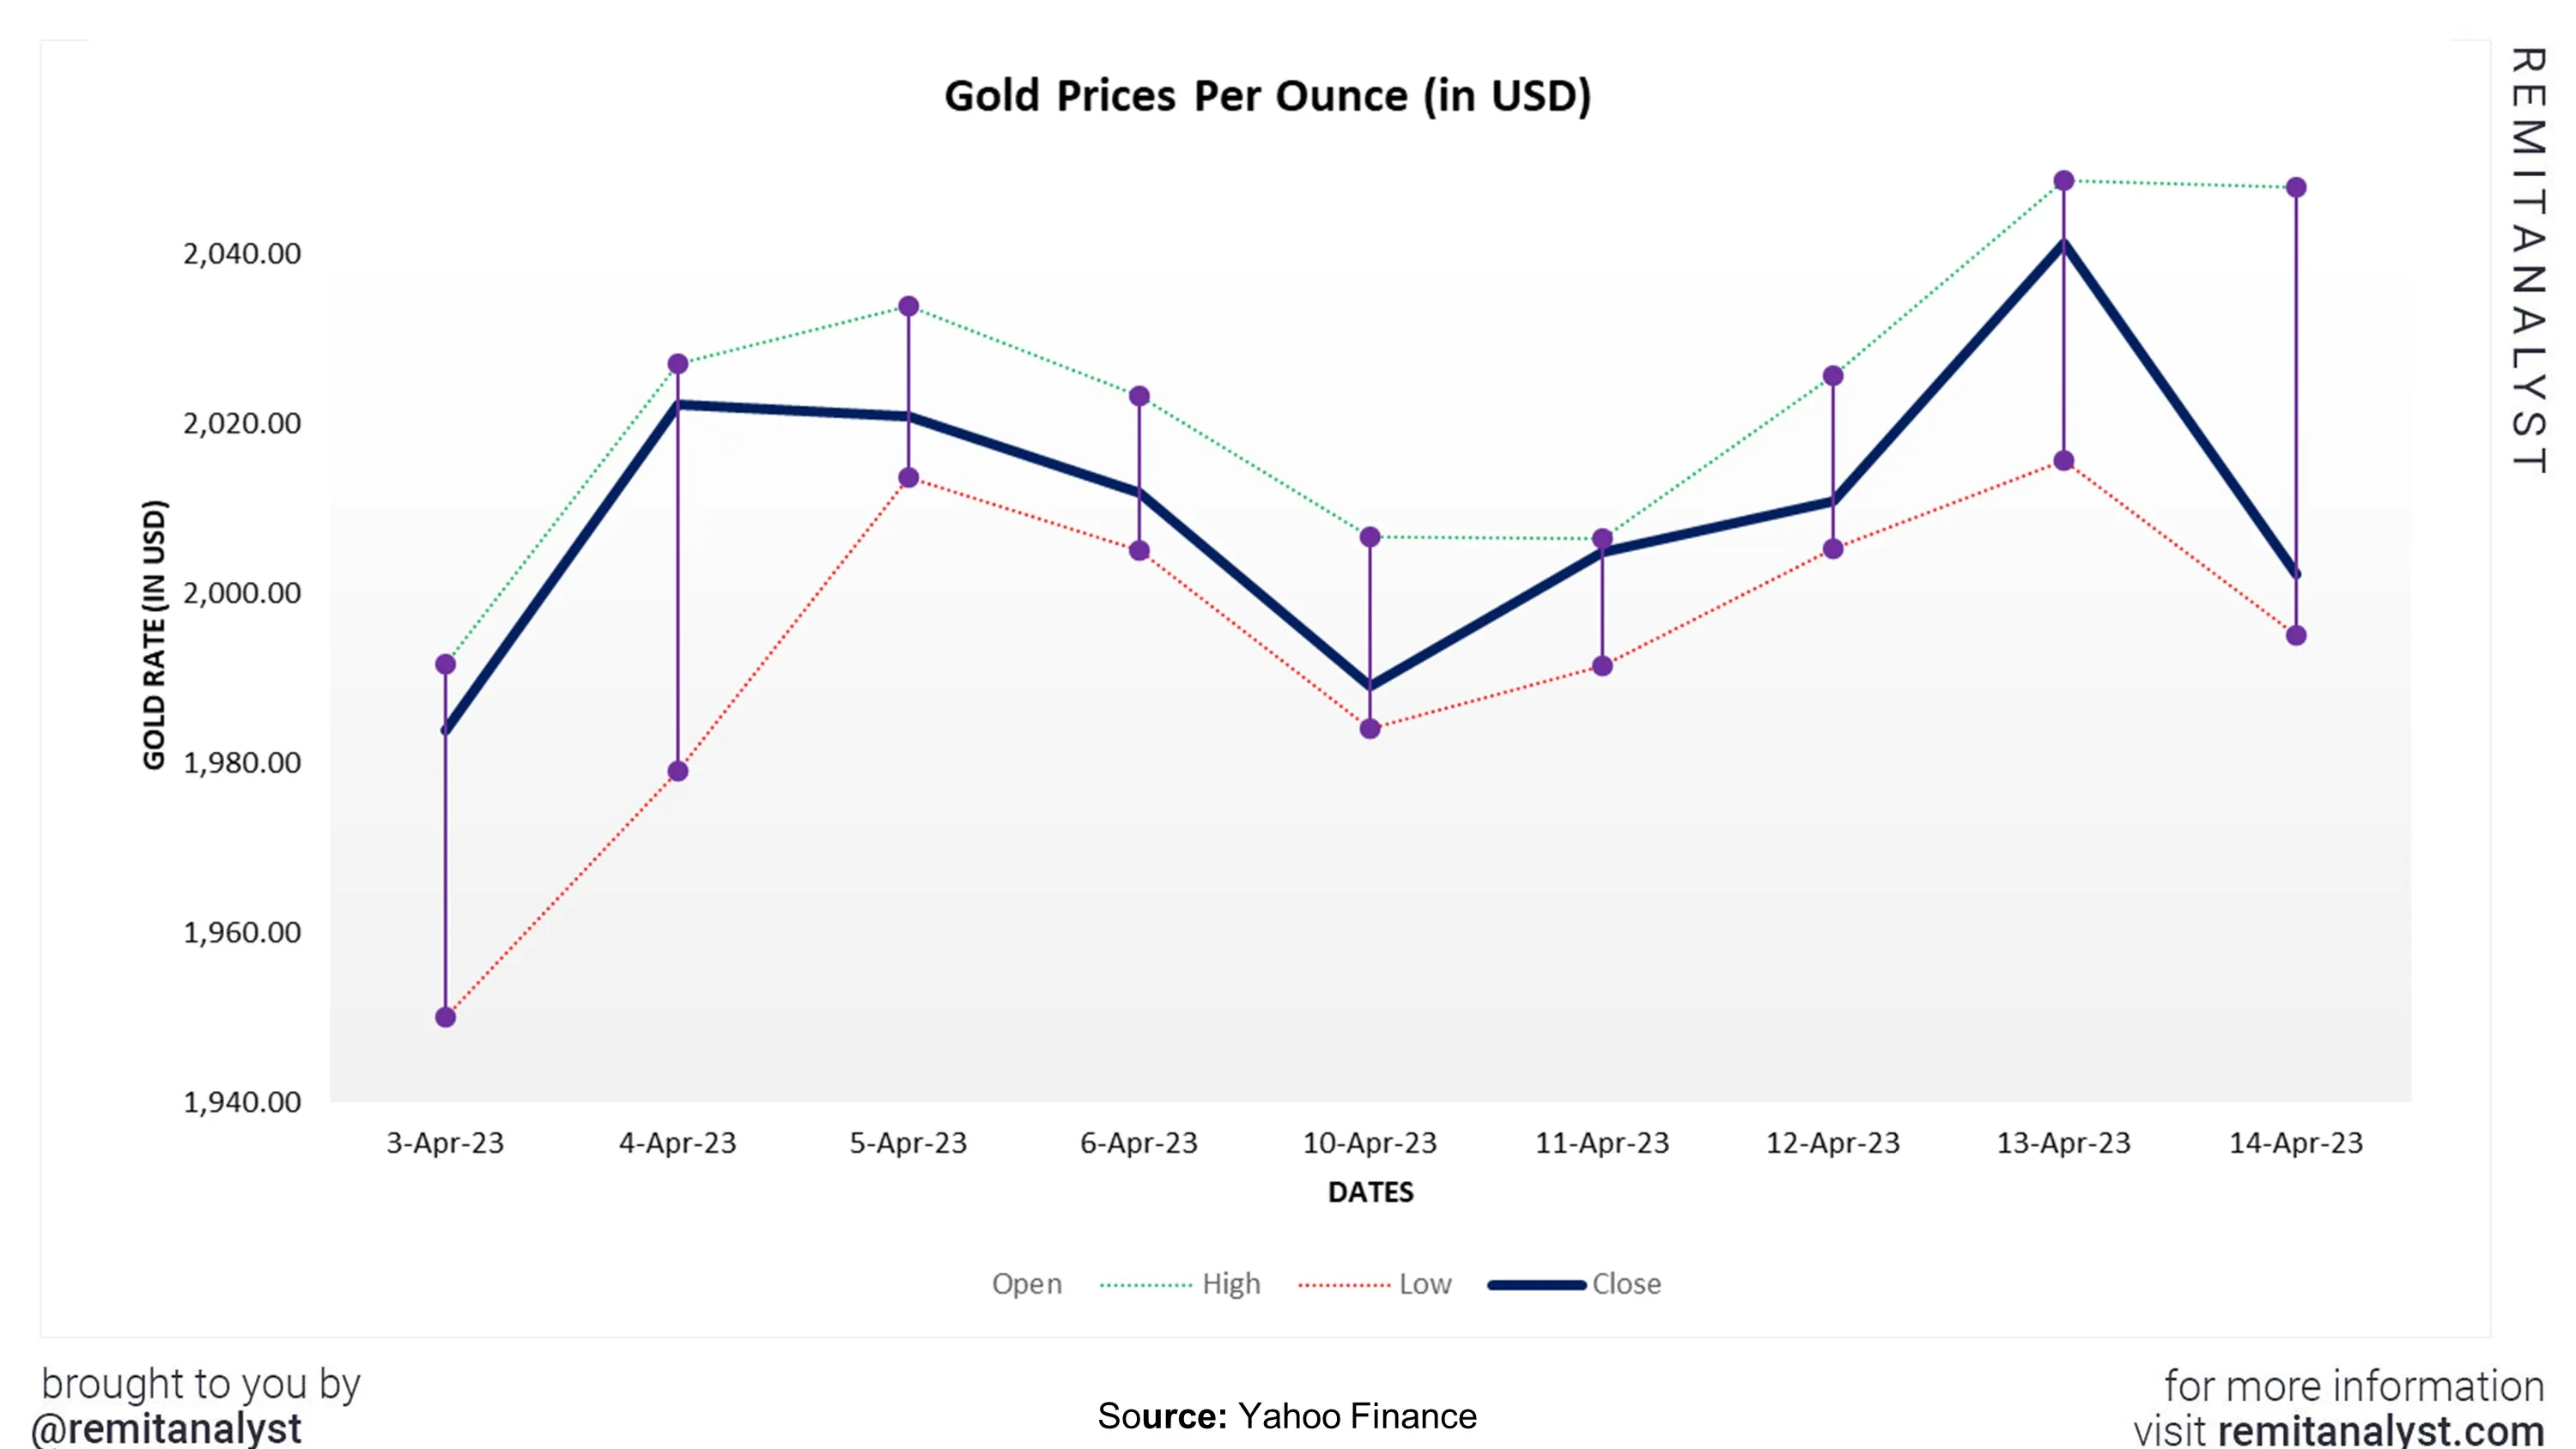 gold-prices-from-03-apr-2023-to-14-apr-2023